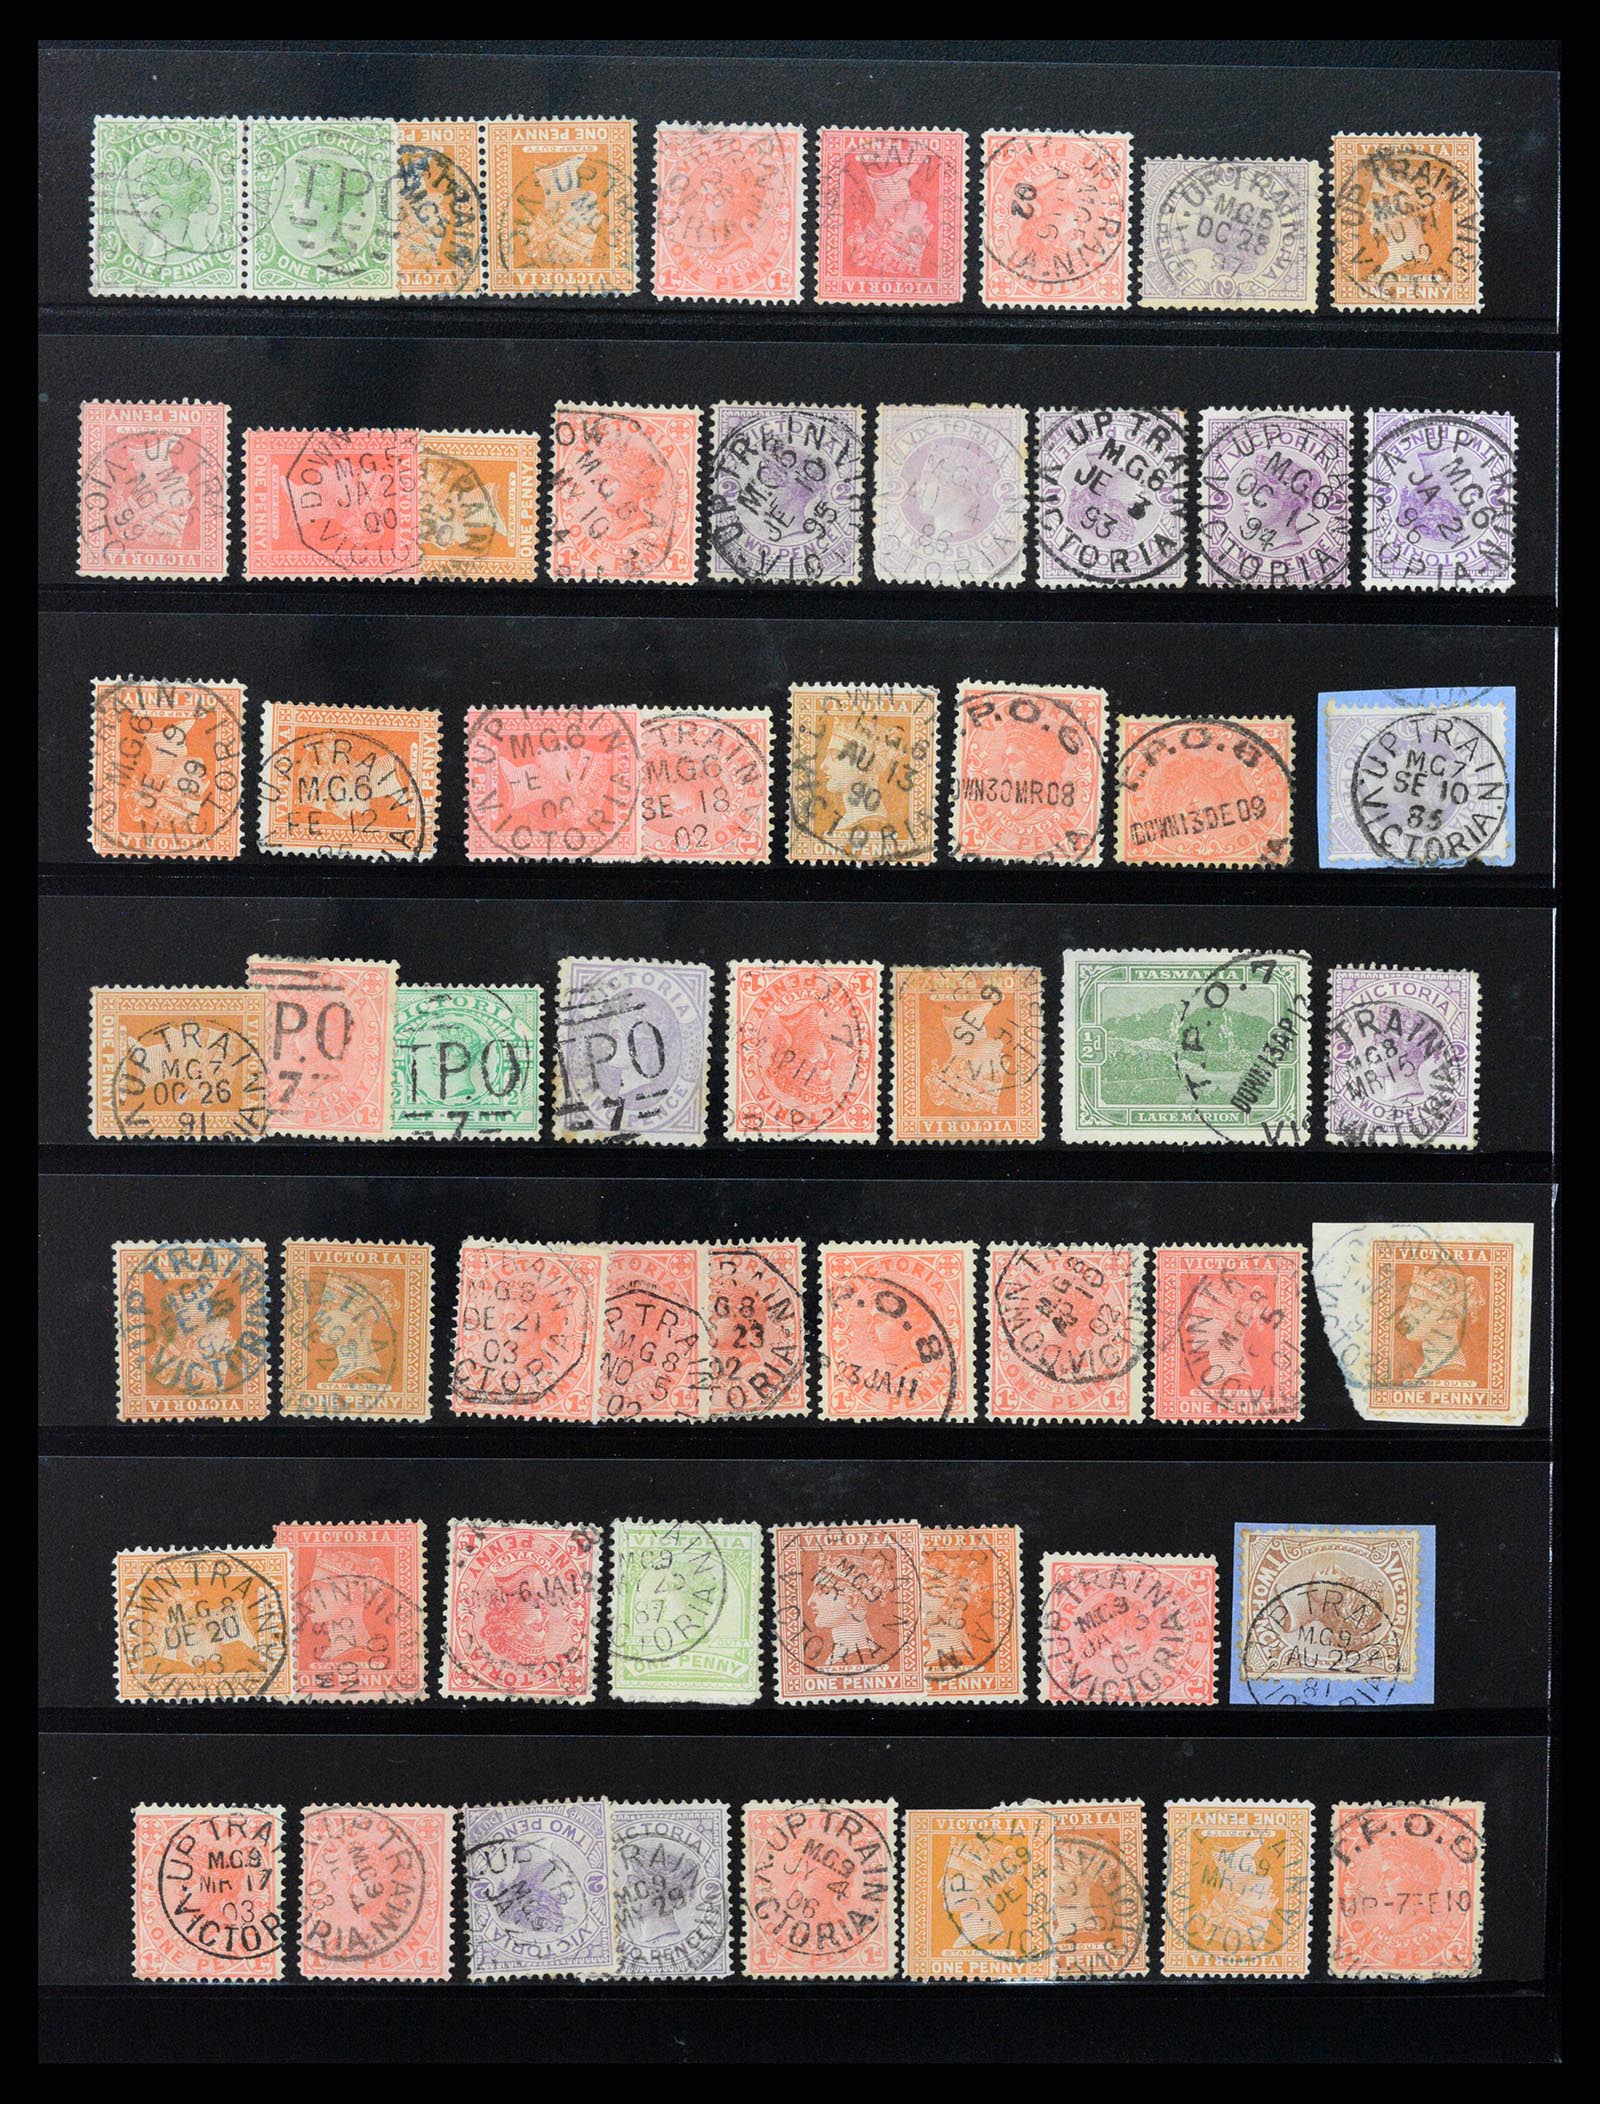 37514 030 - Stamp collection 37514 Victoria tpo cancellations 1865-1930.